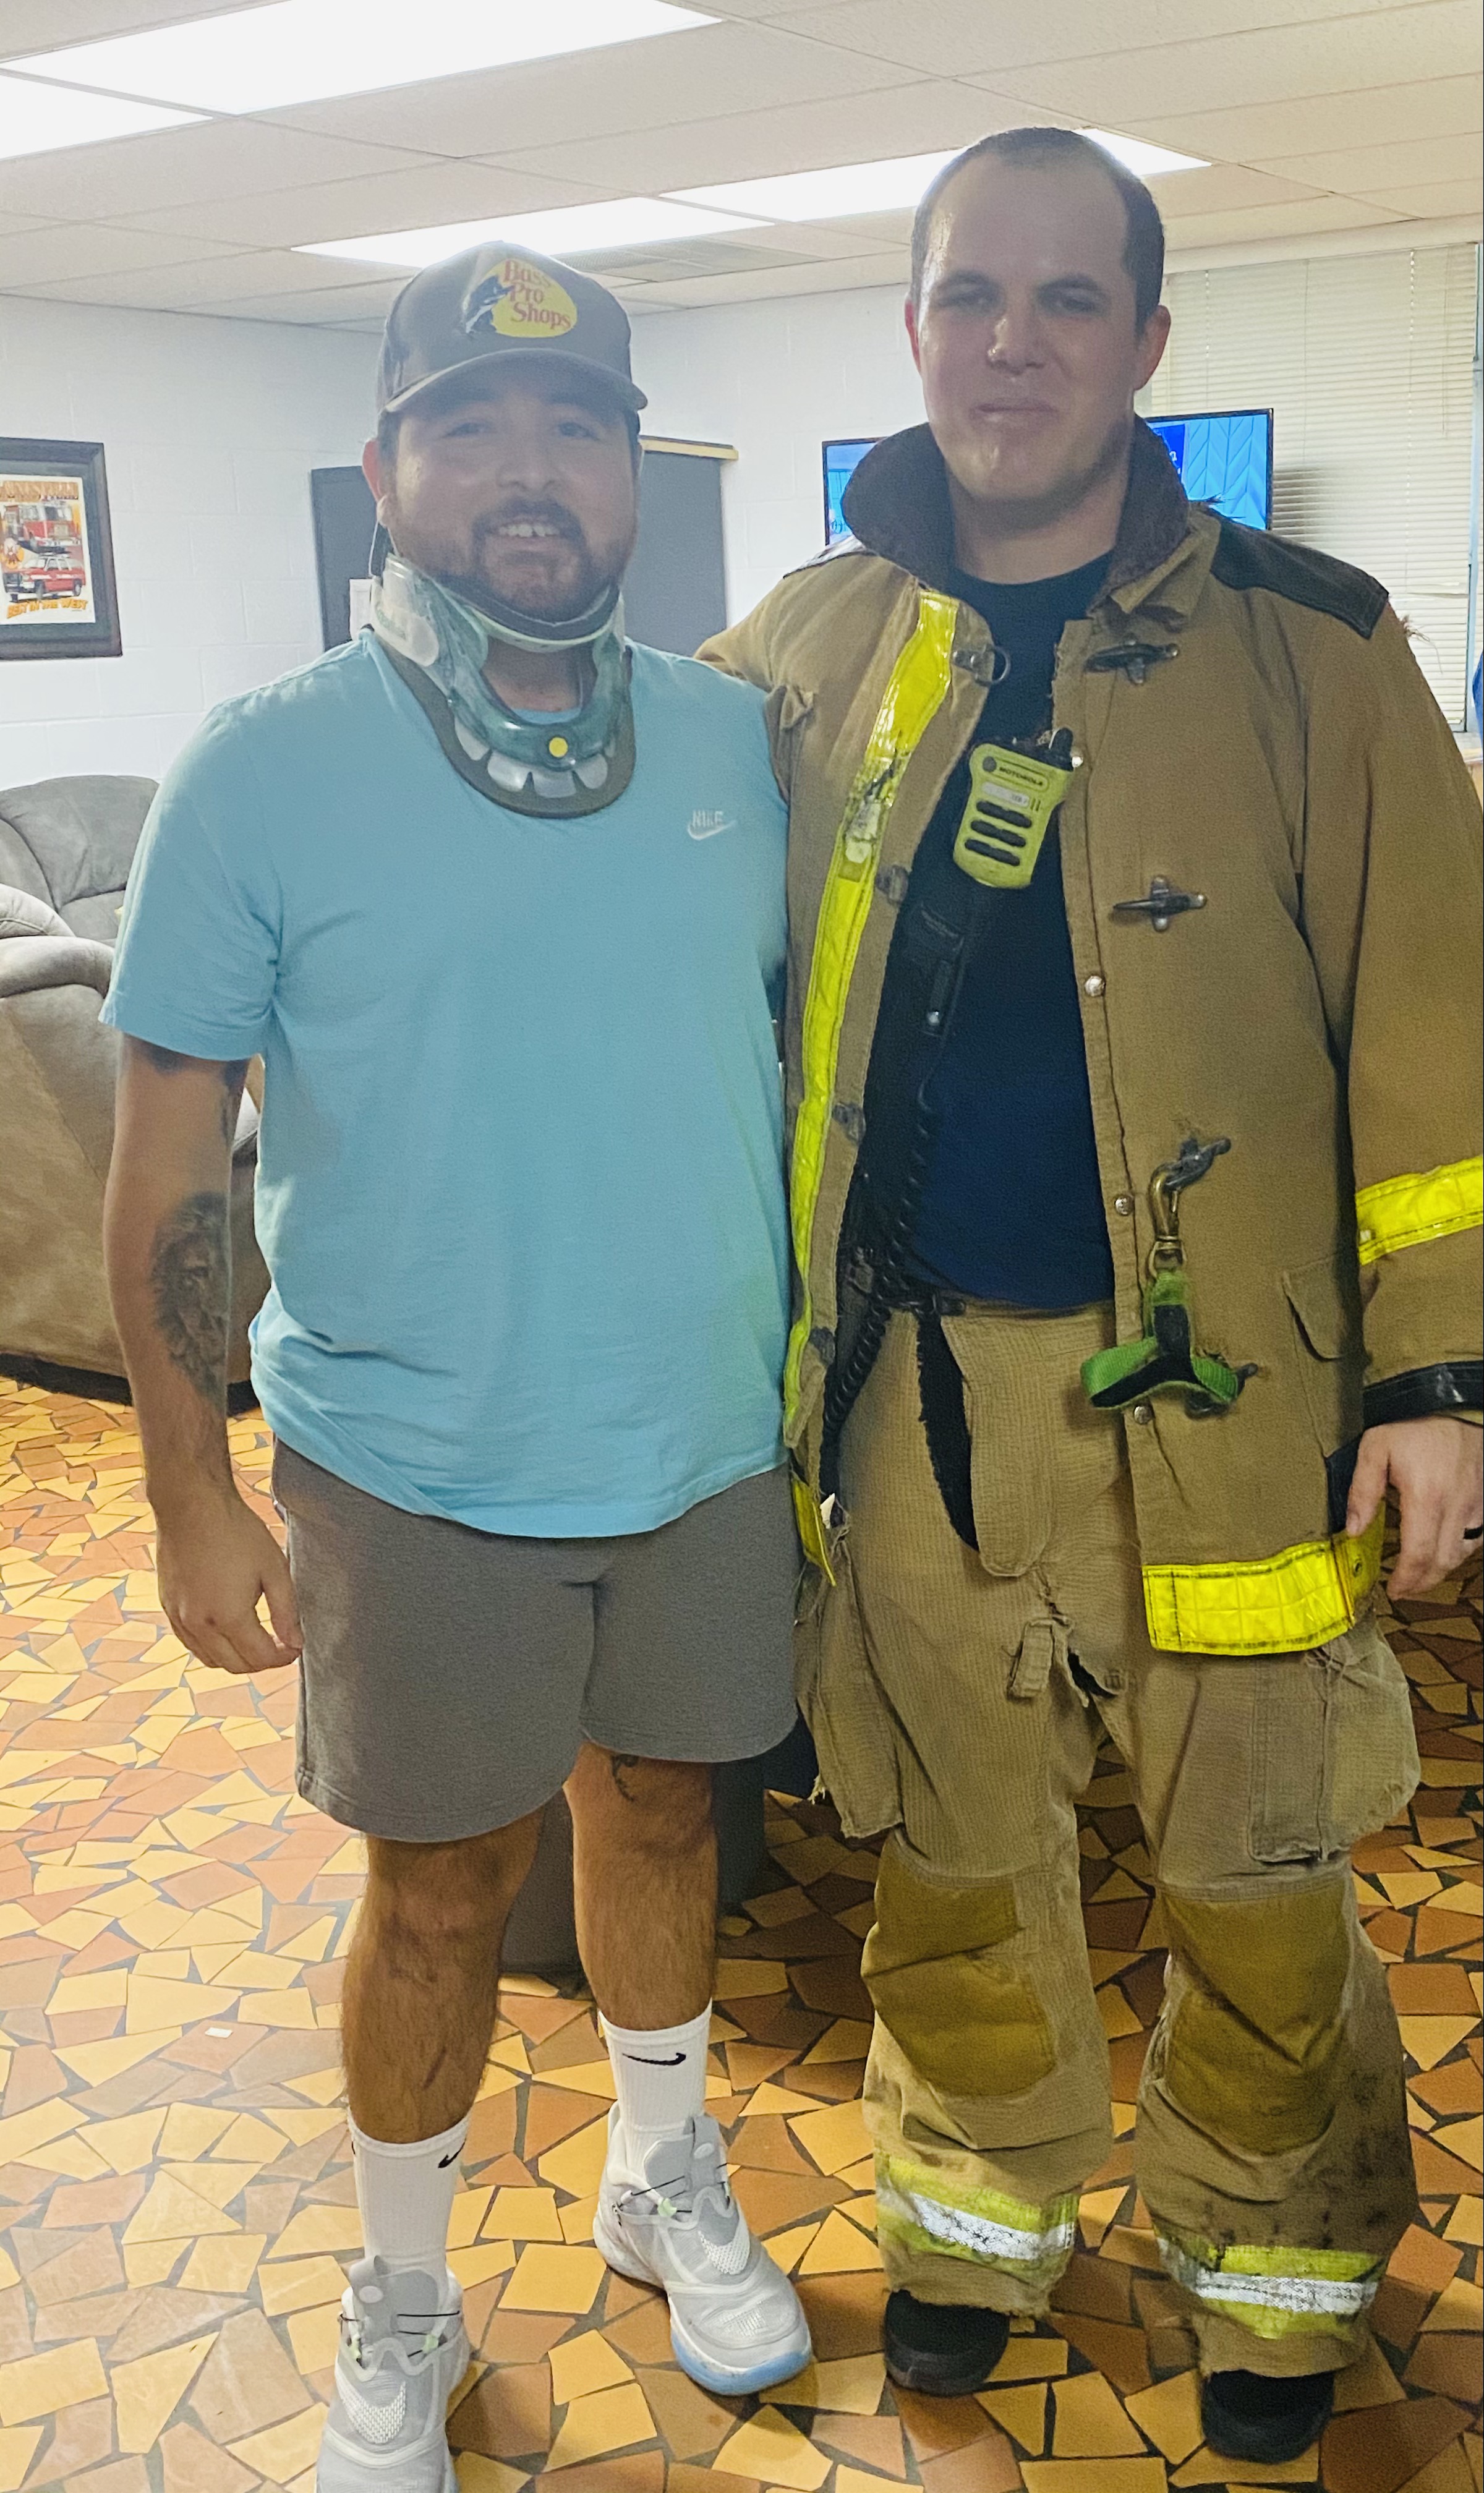 Matt visits with a firefighter after recovery